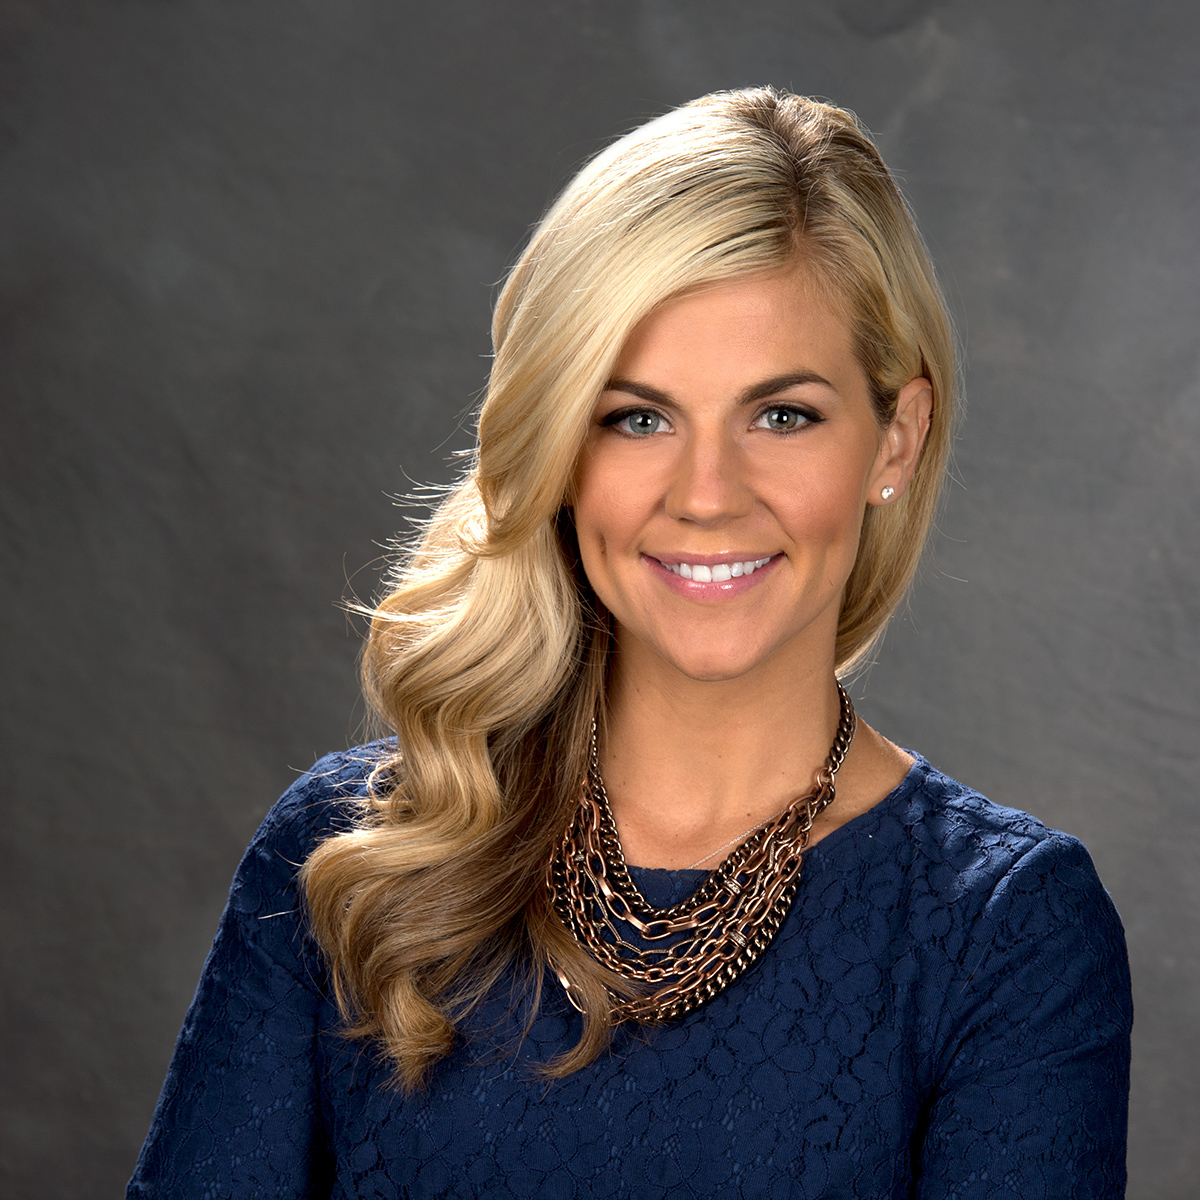 Samantha Steele is now using the name Samantha Ponder after her marriage to...